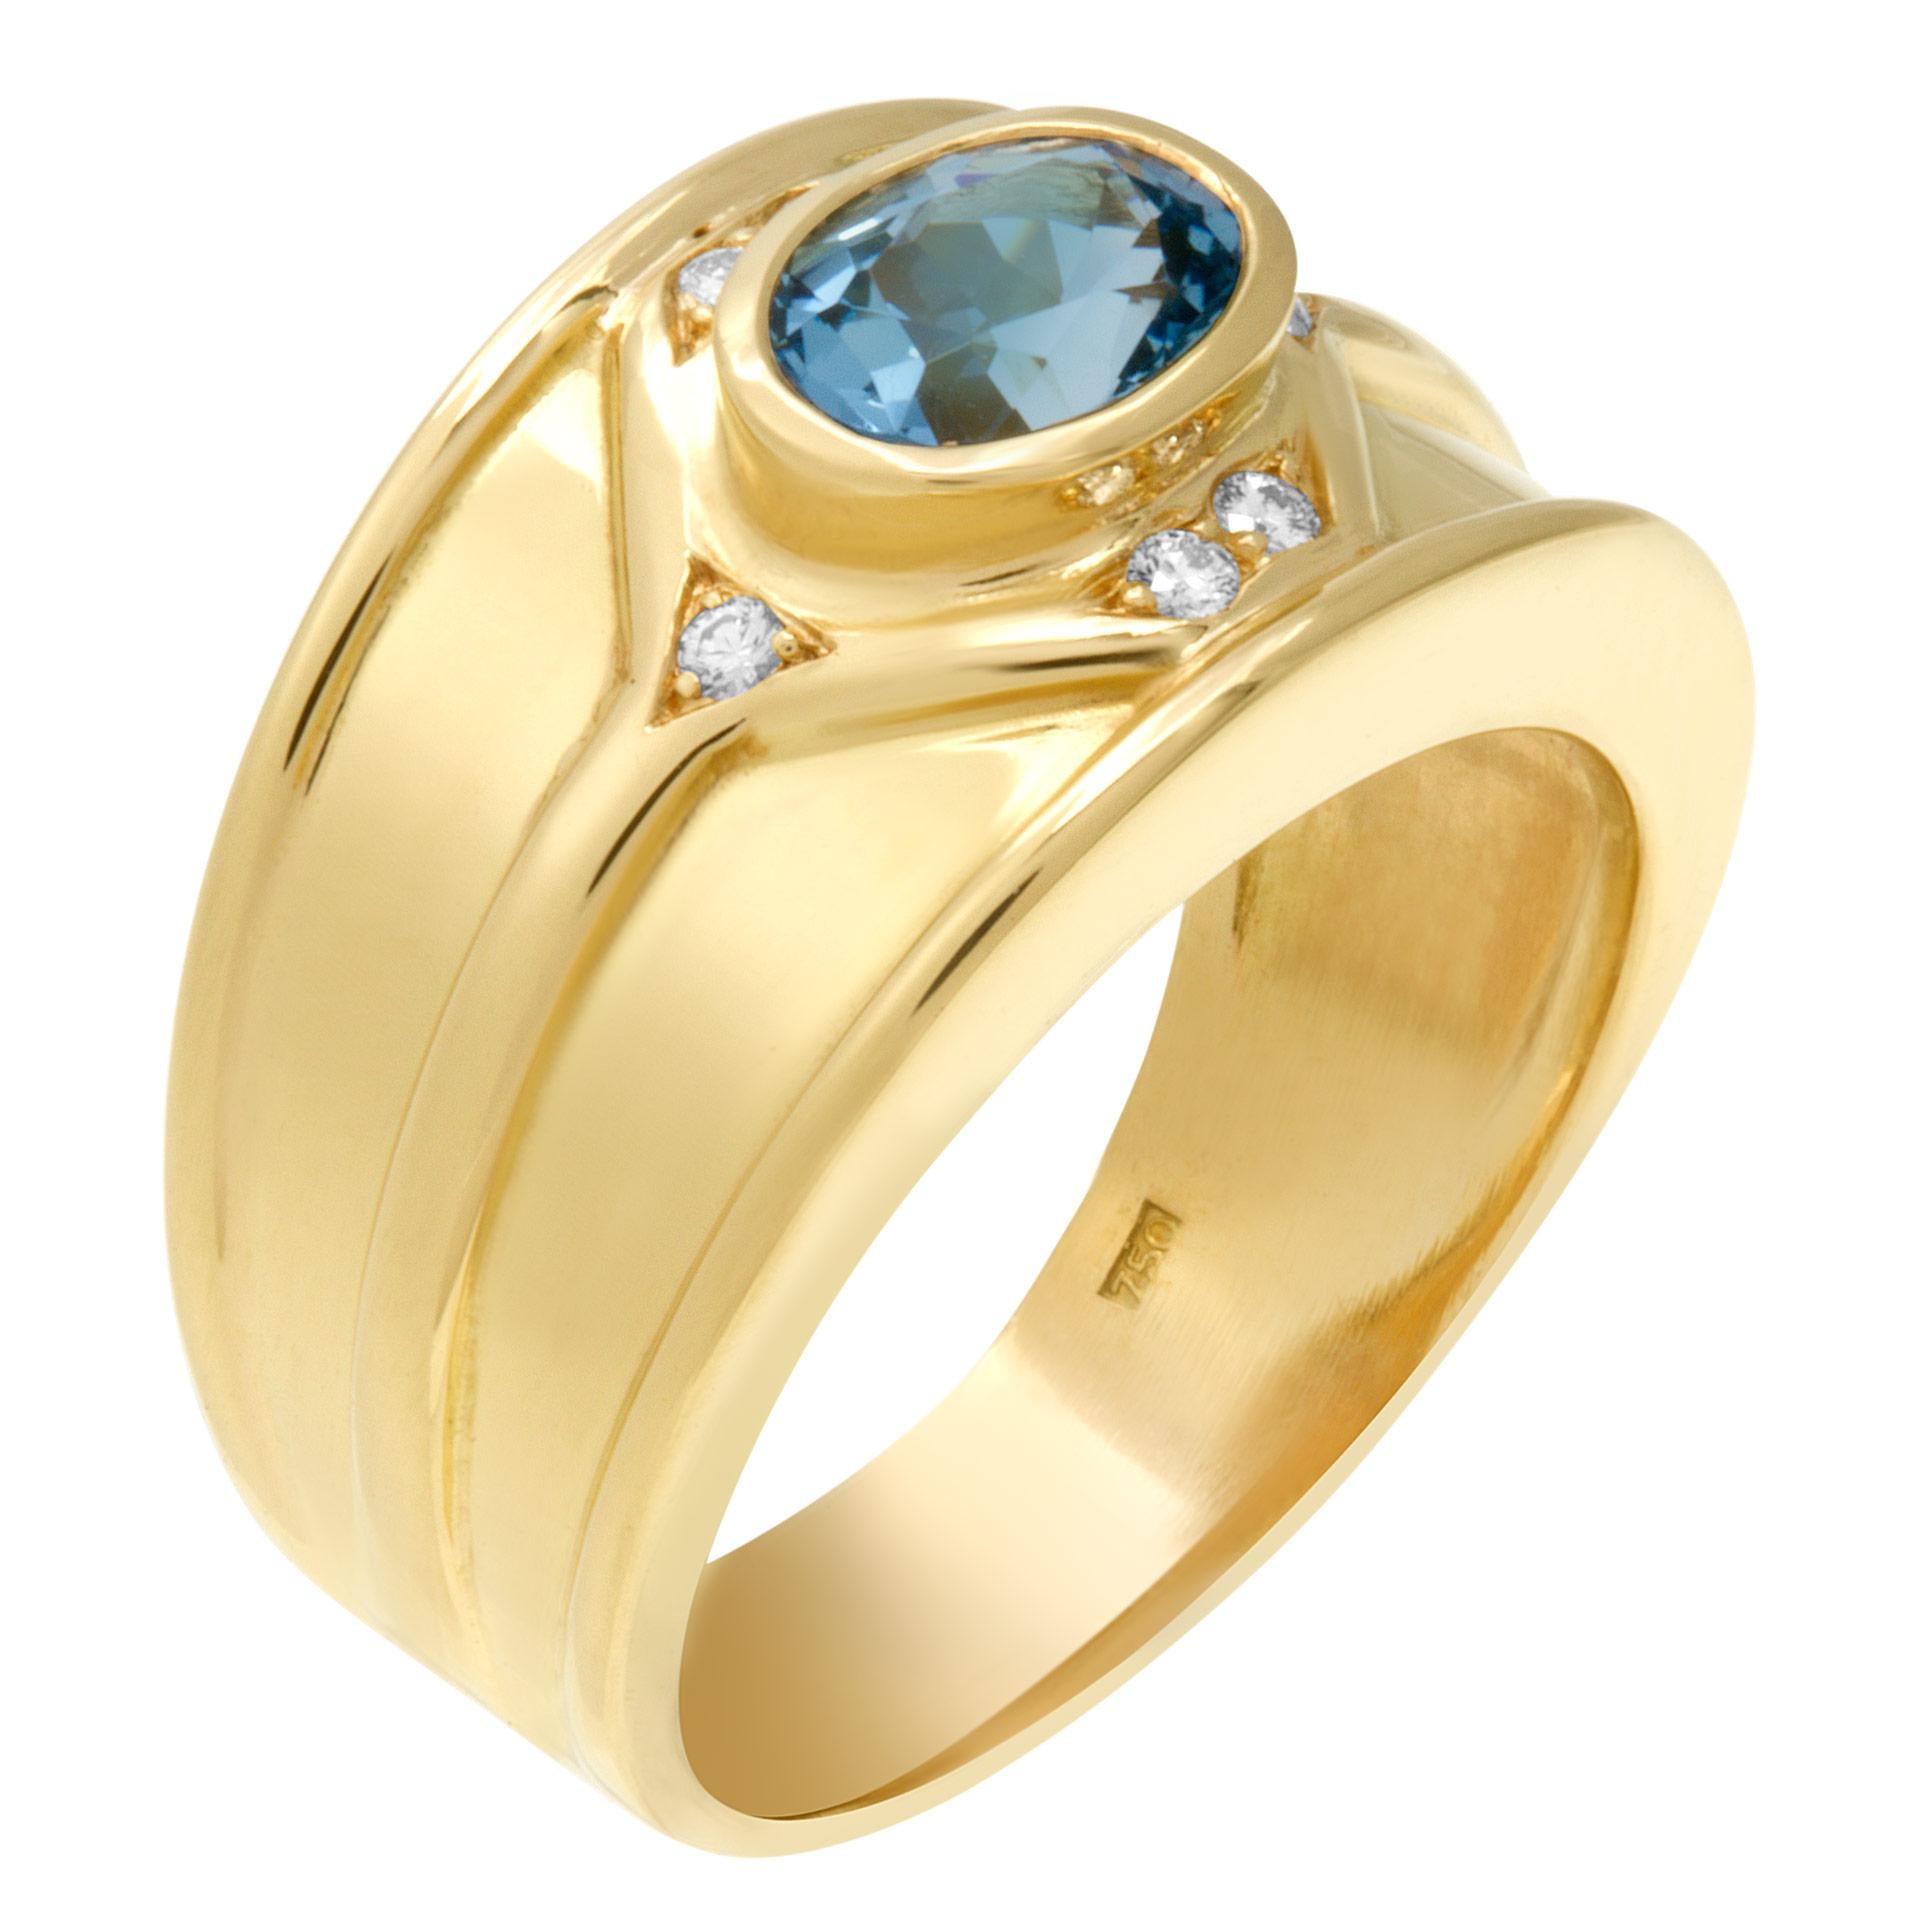 Aqua blue topaz ring with approximately 0.10 carat in diamond accents set in 18k gold. Width at head: 12.5mm, with at shank: 4.8mm. Size 8.

This Diamond ring is currently size 8 and some items can be sized up or down, please ask! It weighs 8.6